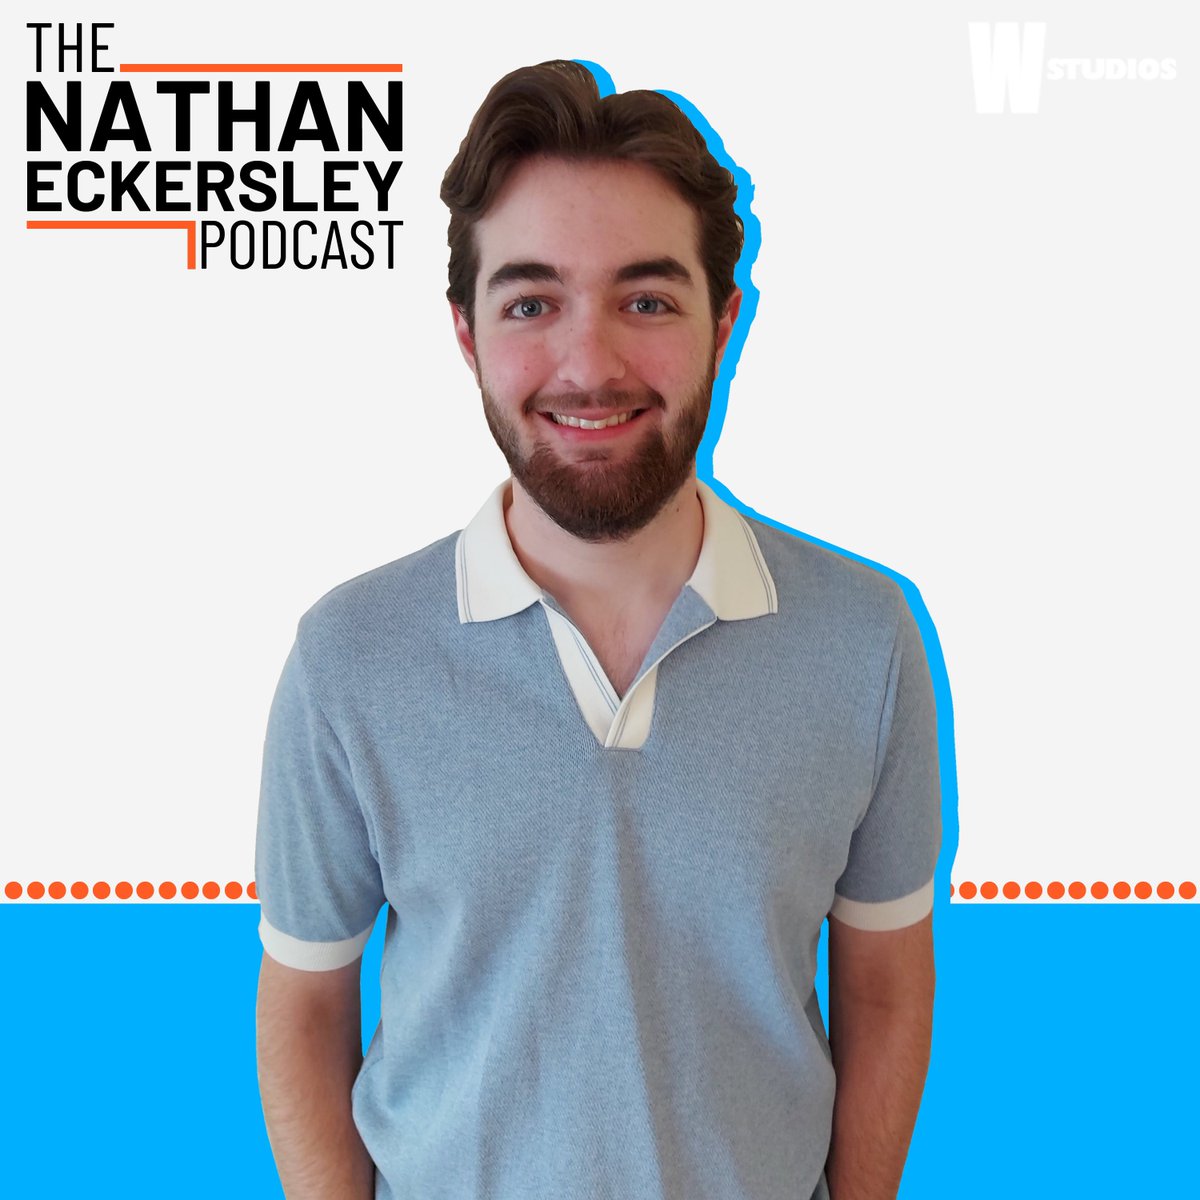 This week on The Nathan Eckersley Podcast, I’ll be looking at the Autumn Statement and asking if it’s too little too late for the @Conservatives. I’ll also ask if immigration is too high, following the release of the latest @ONS data. Listen from 3pm on @wizradio